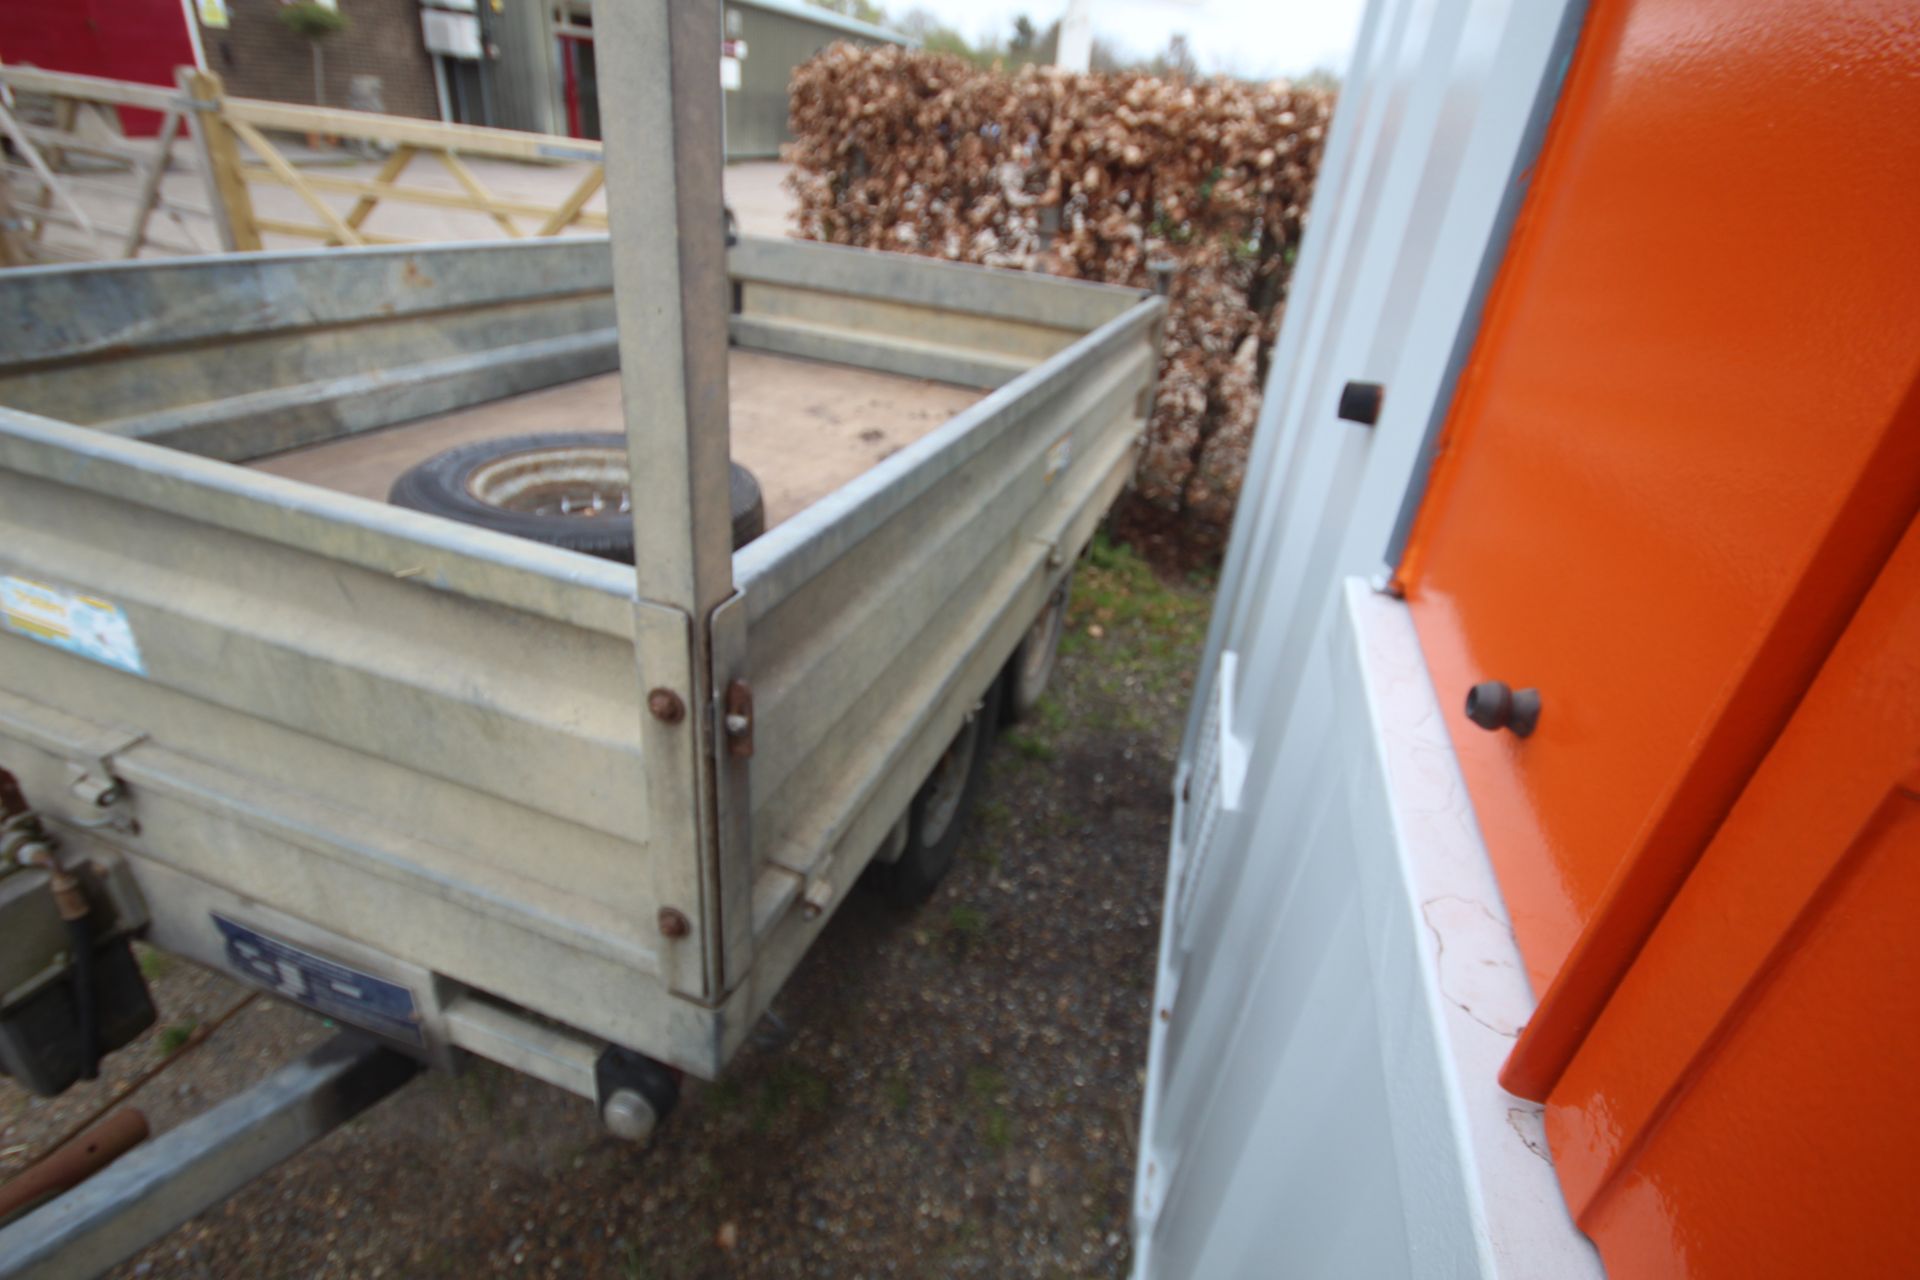 Warwick 8ft x 5ft twin axle flatbed tipping trailer. With drop sides. Control box held. - Image 7 of 29